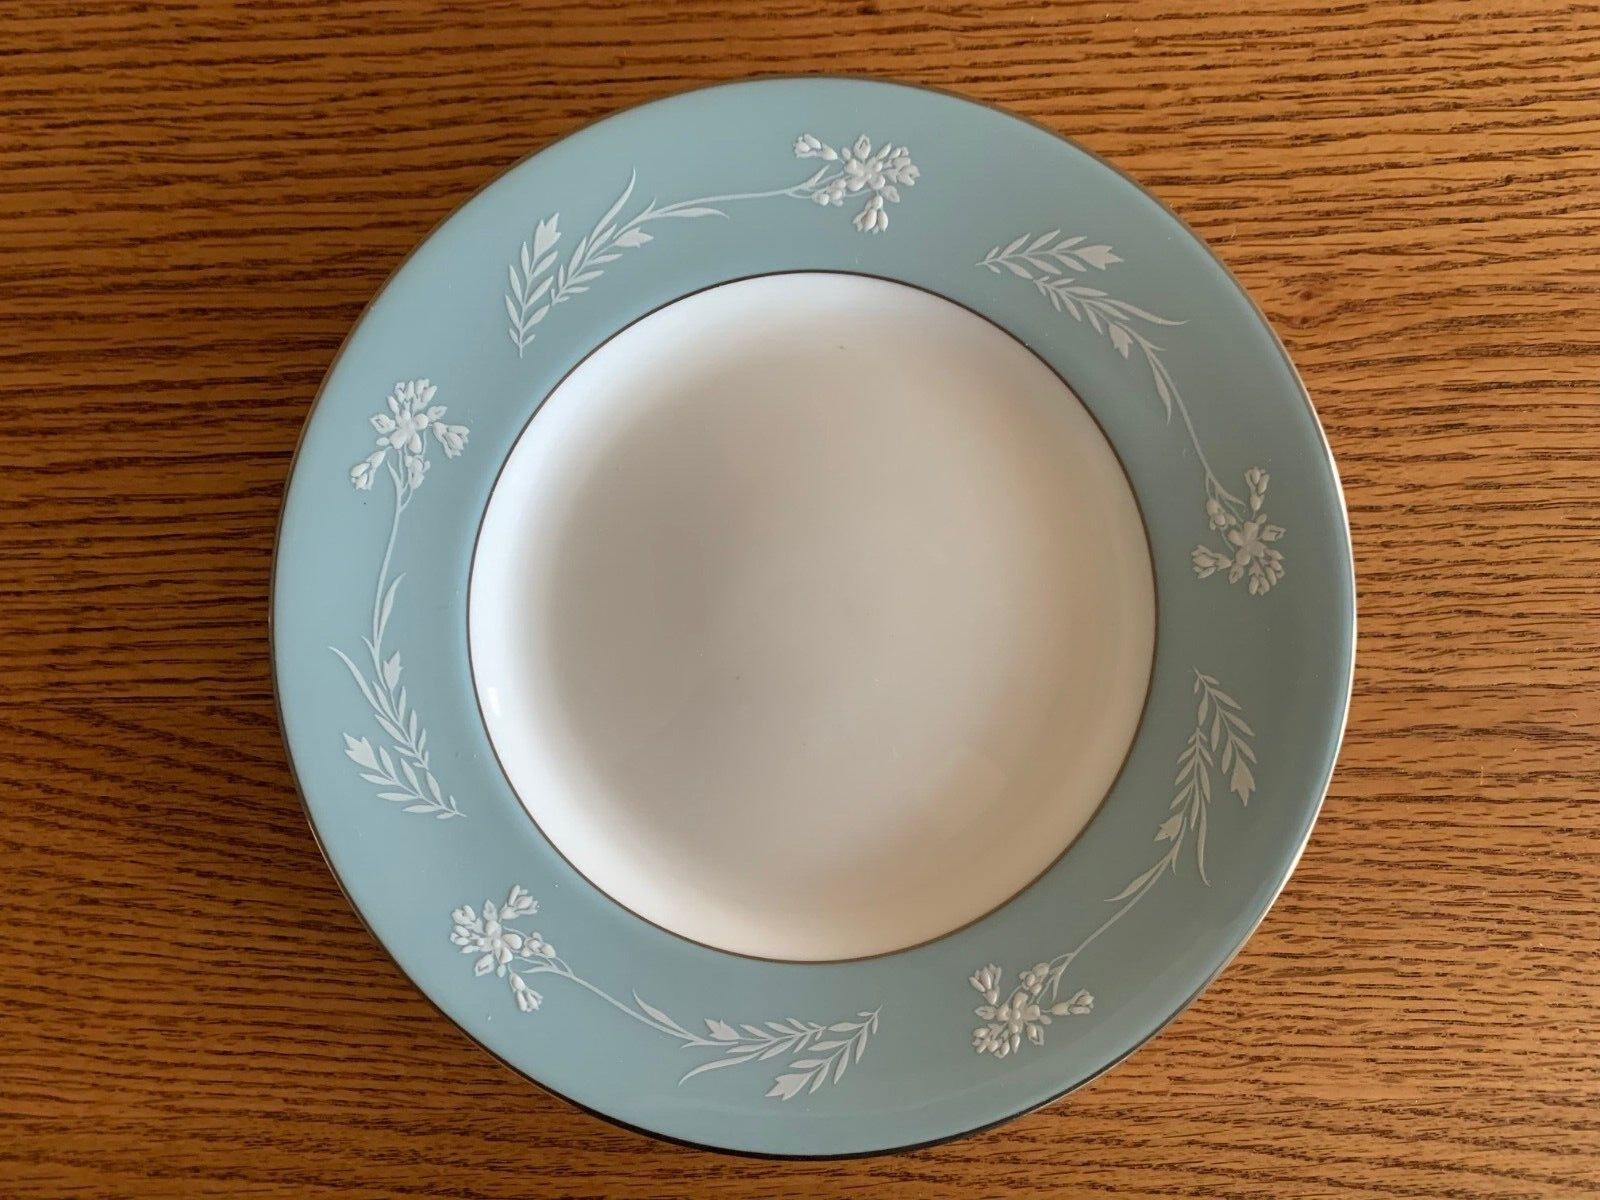 MINTON BONE CHINA TURQUOISE CAMEO SALAD DESSERT PLATE S-663 MADE IN ENGLAND 1957